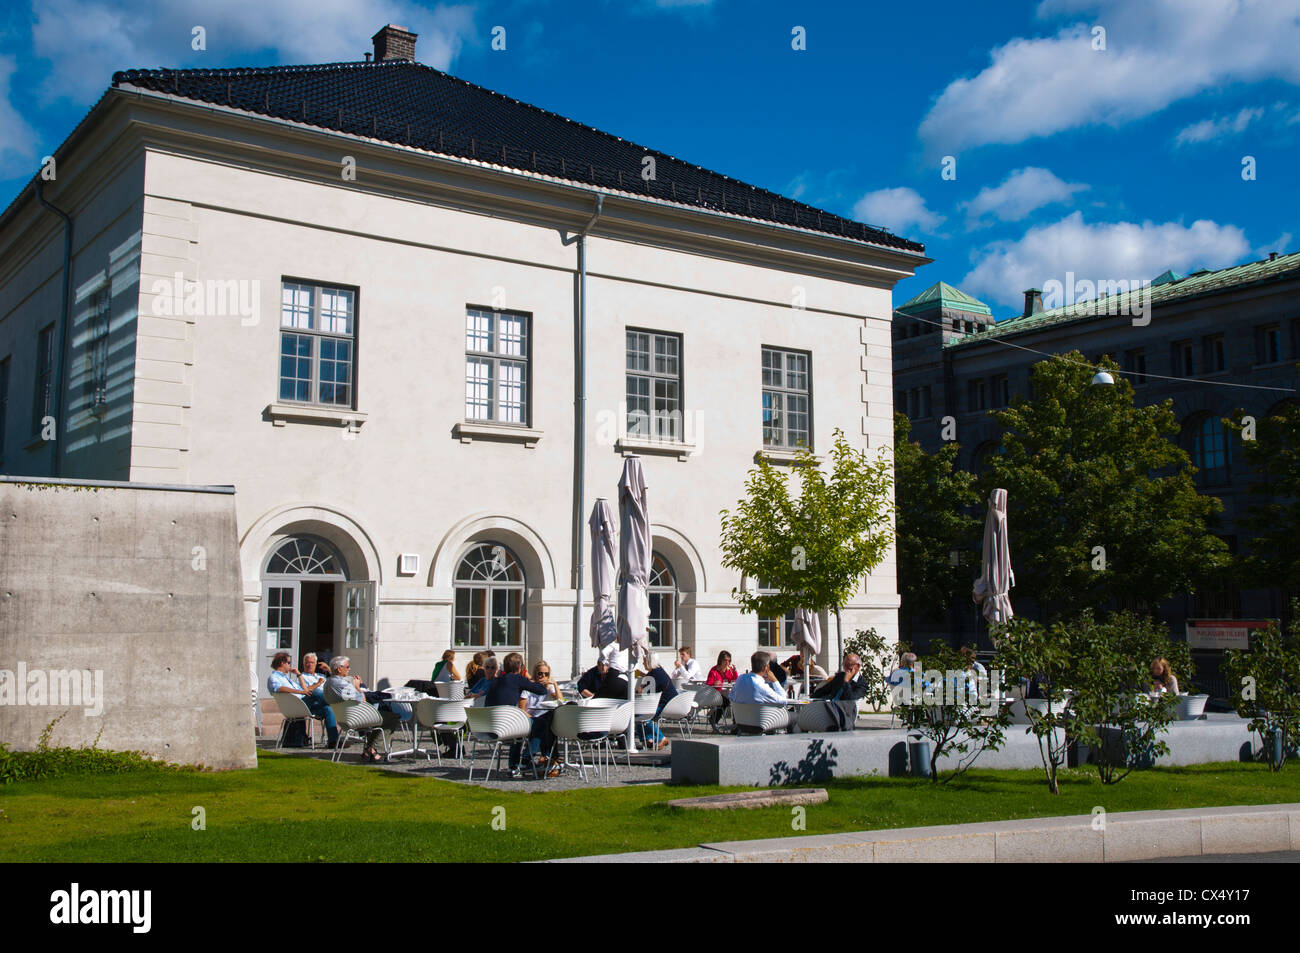 Restaurant terrace outside National museum of Art Architecture and design Kvadraturen district old town Oslo Norway Europe Stock Photo